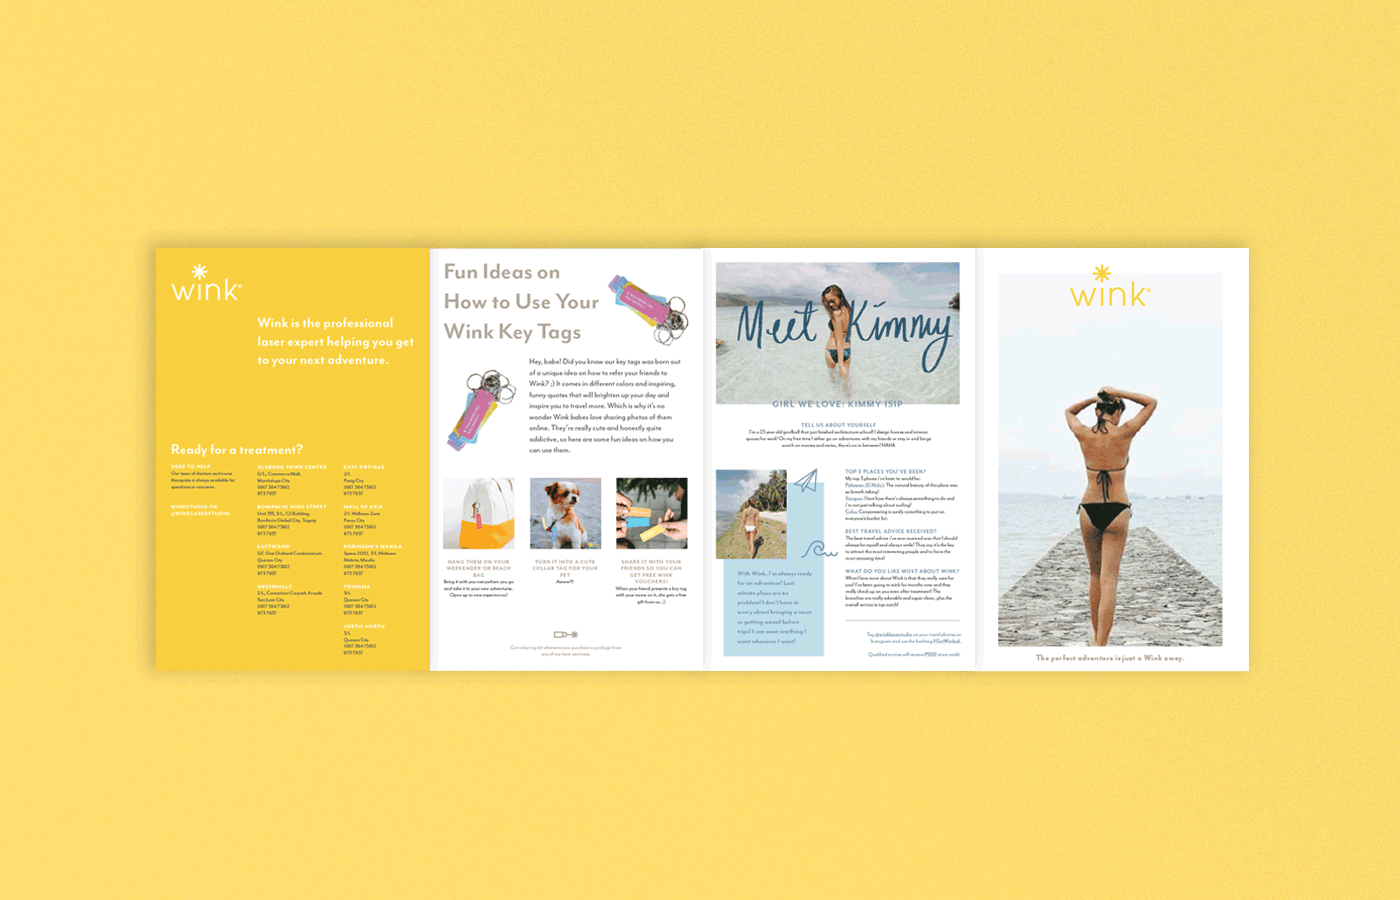 Animated brochure layout and design for beauty service brand Wink Laser Studio